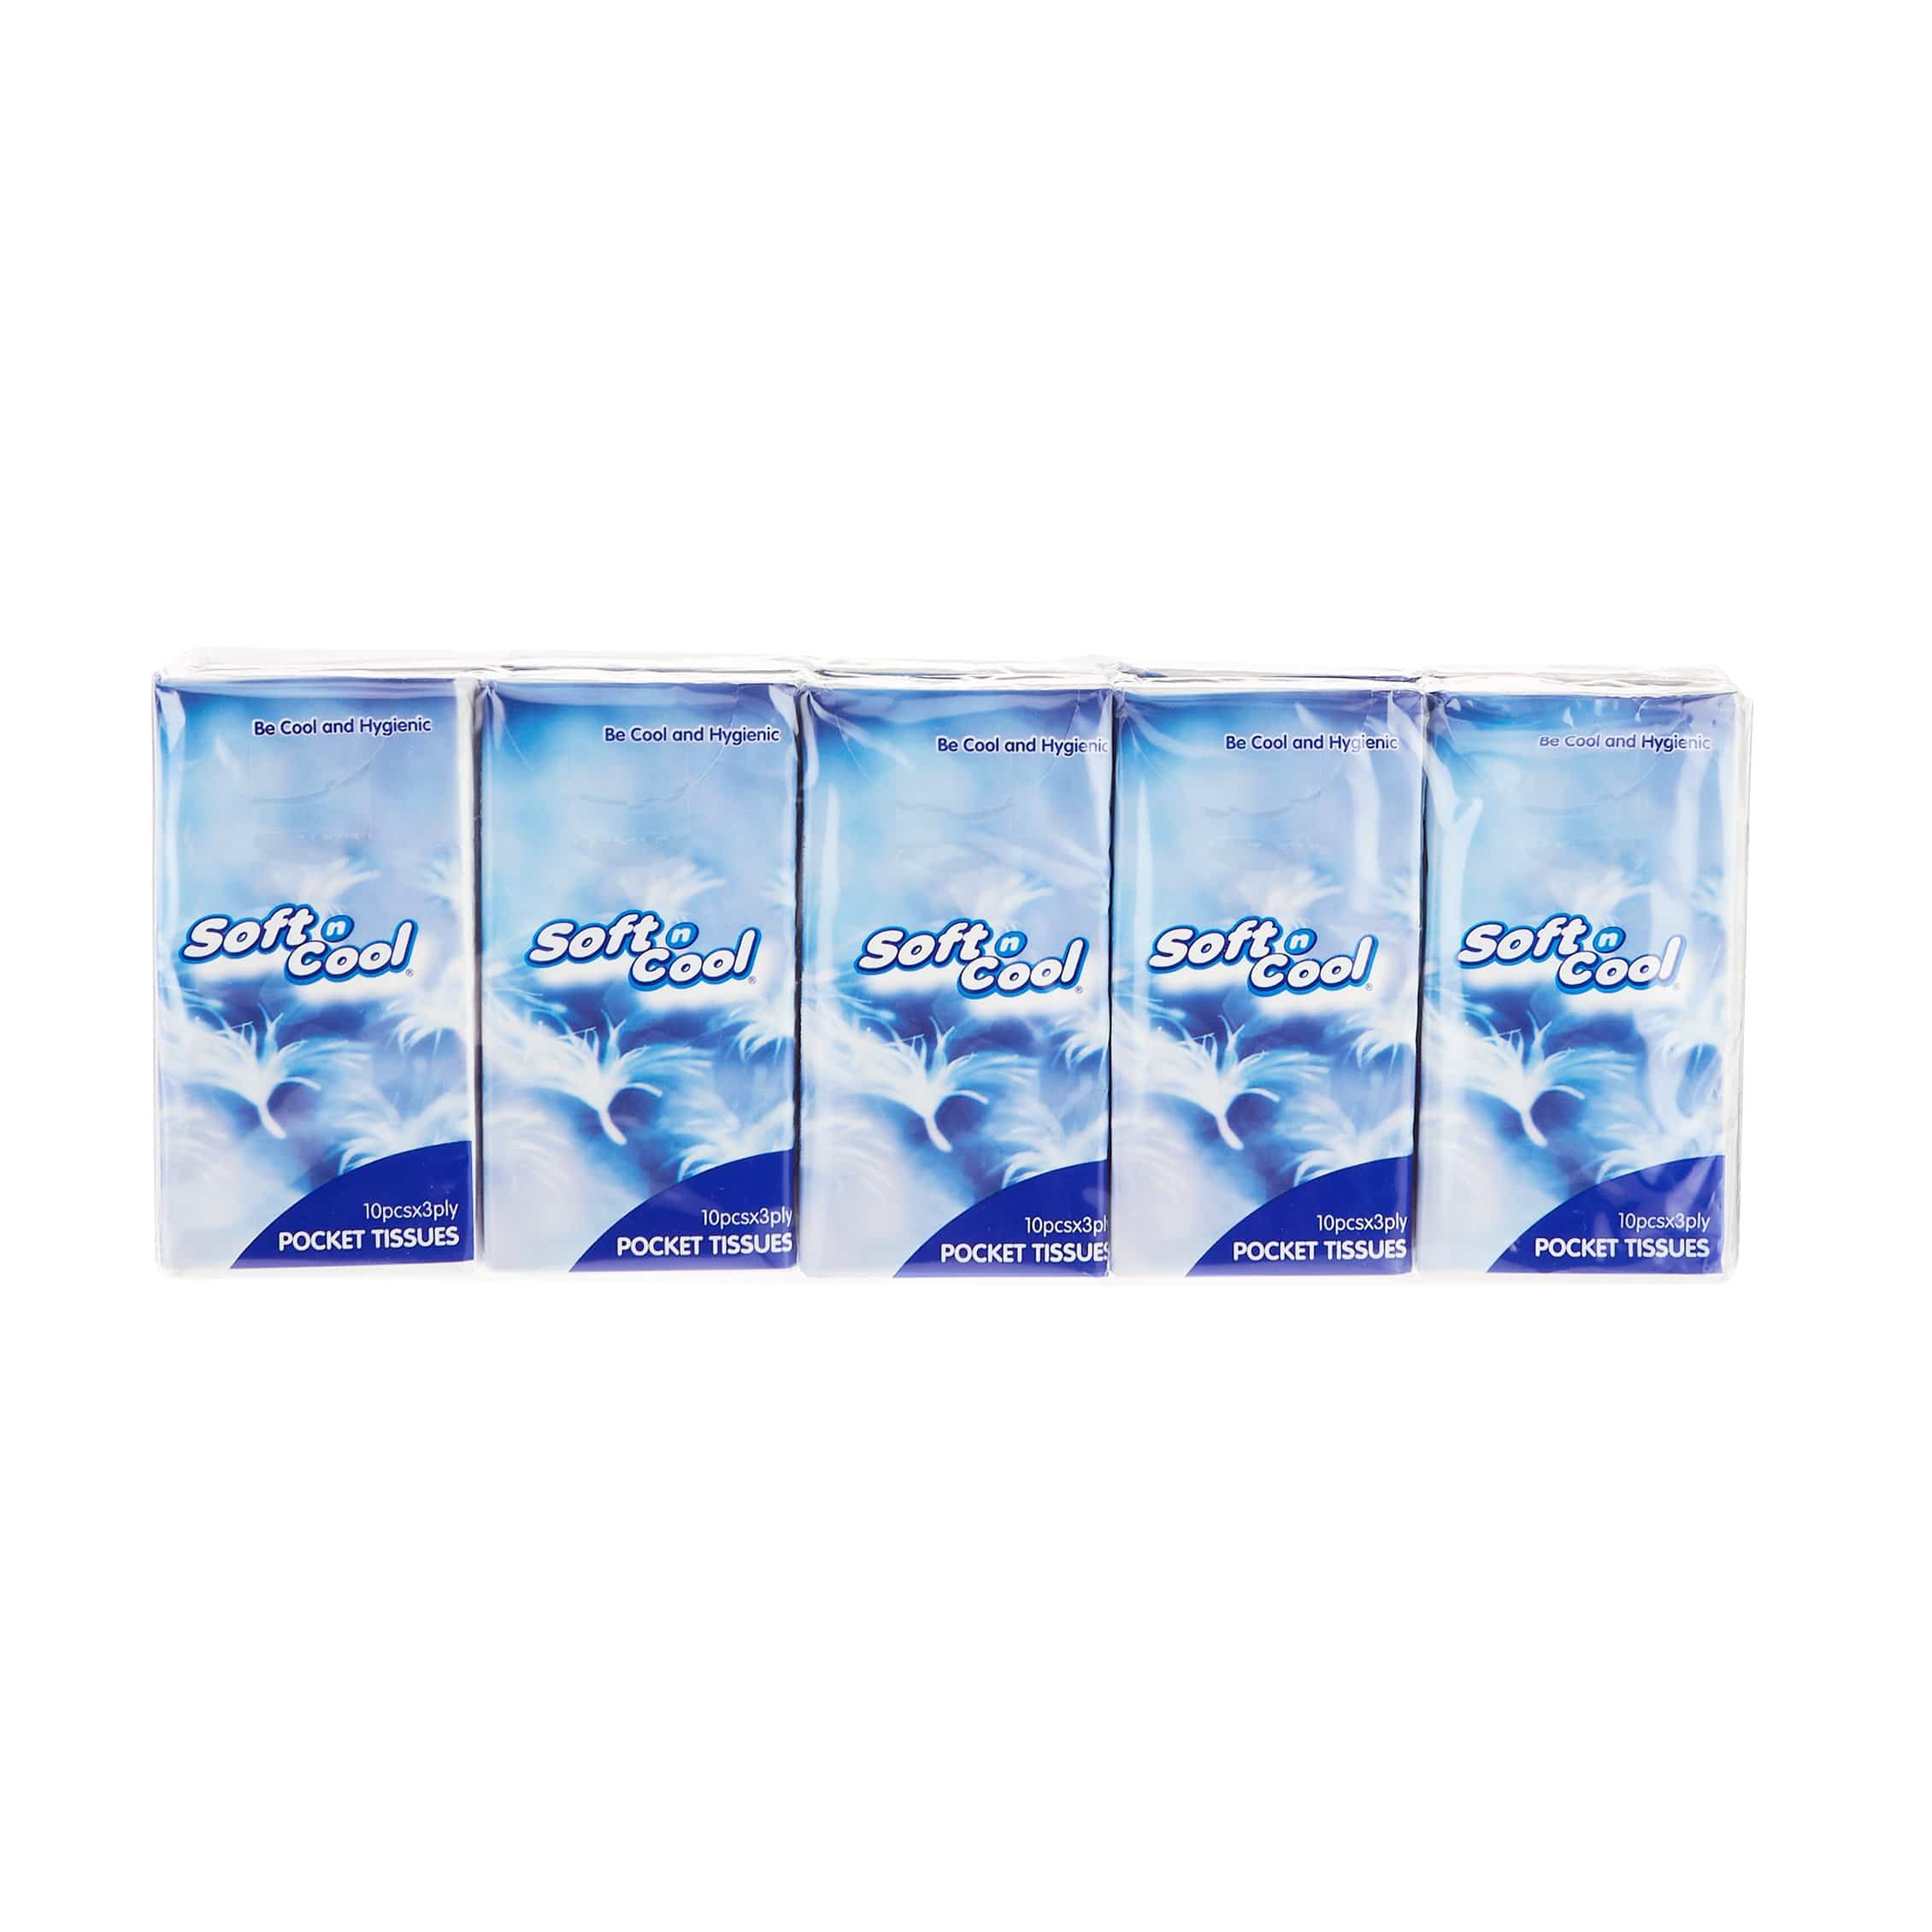 Soft n Cool 3 Ply Pocket Tissue Without Fragrance 10 Packet - Hotpack Oman